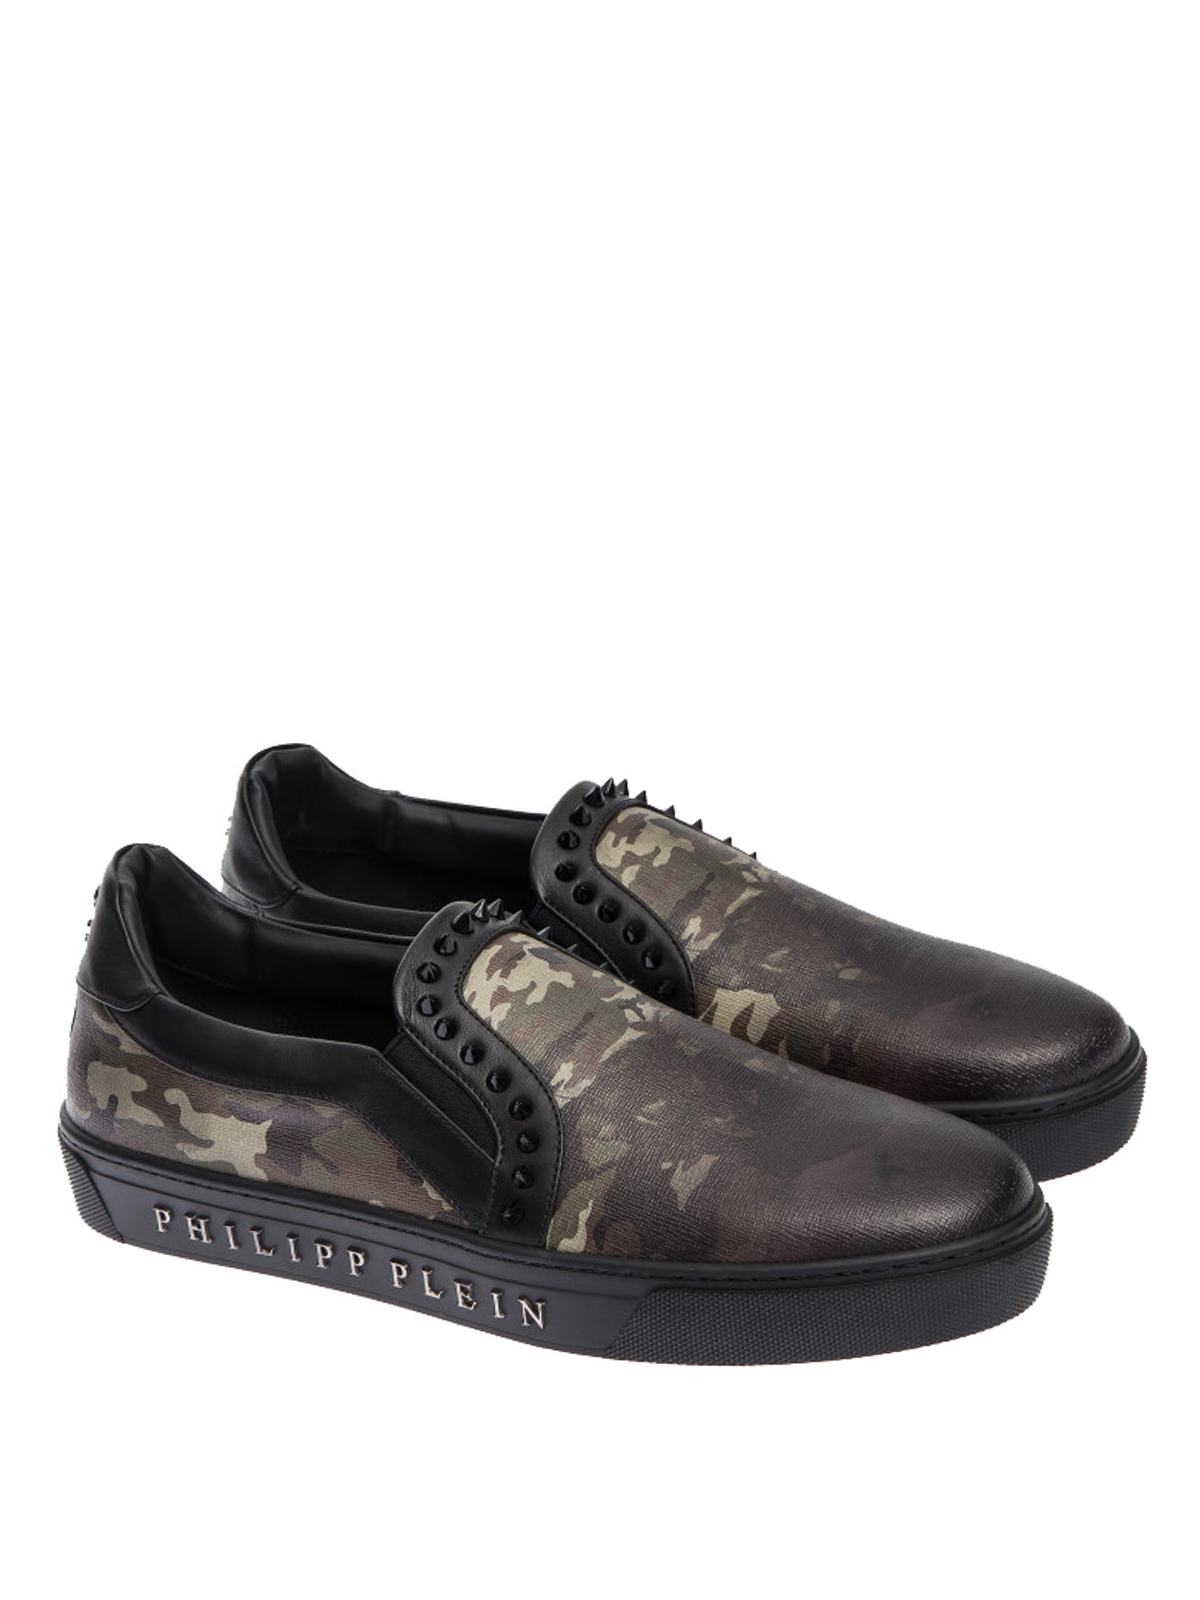 philipp plein loafers shoes